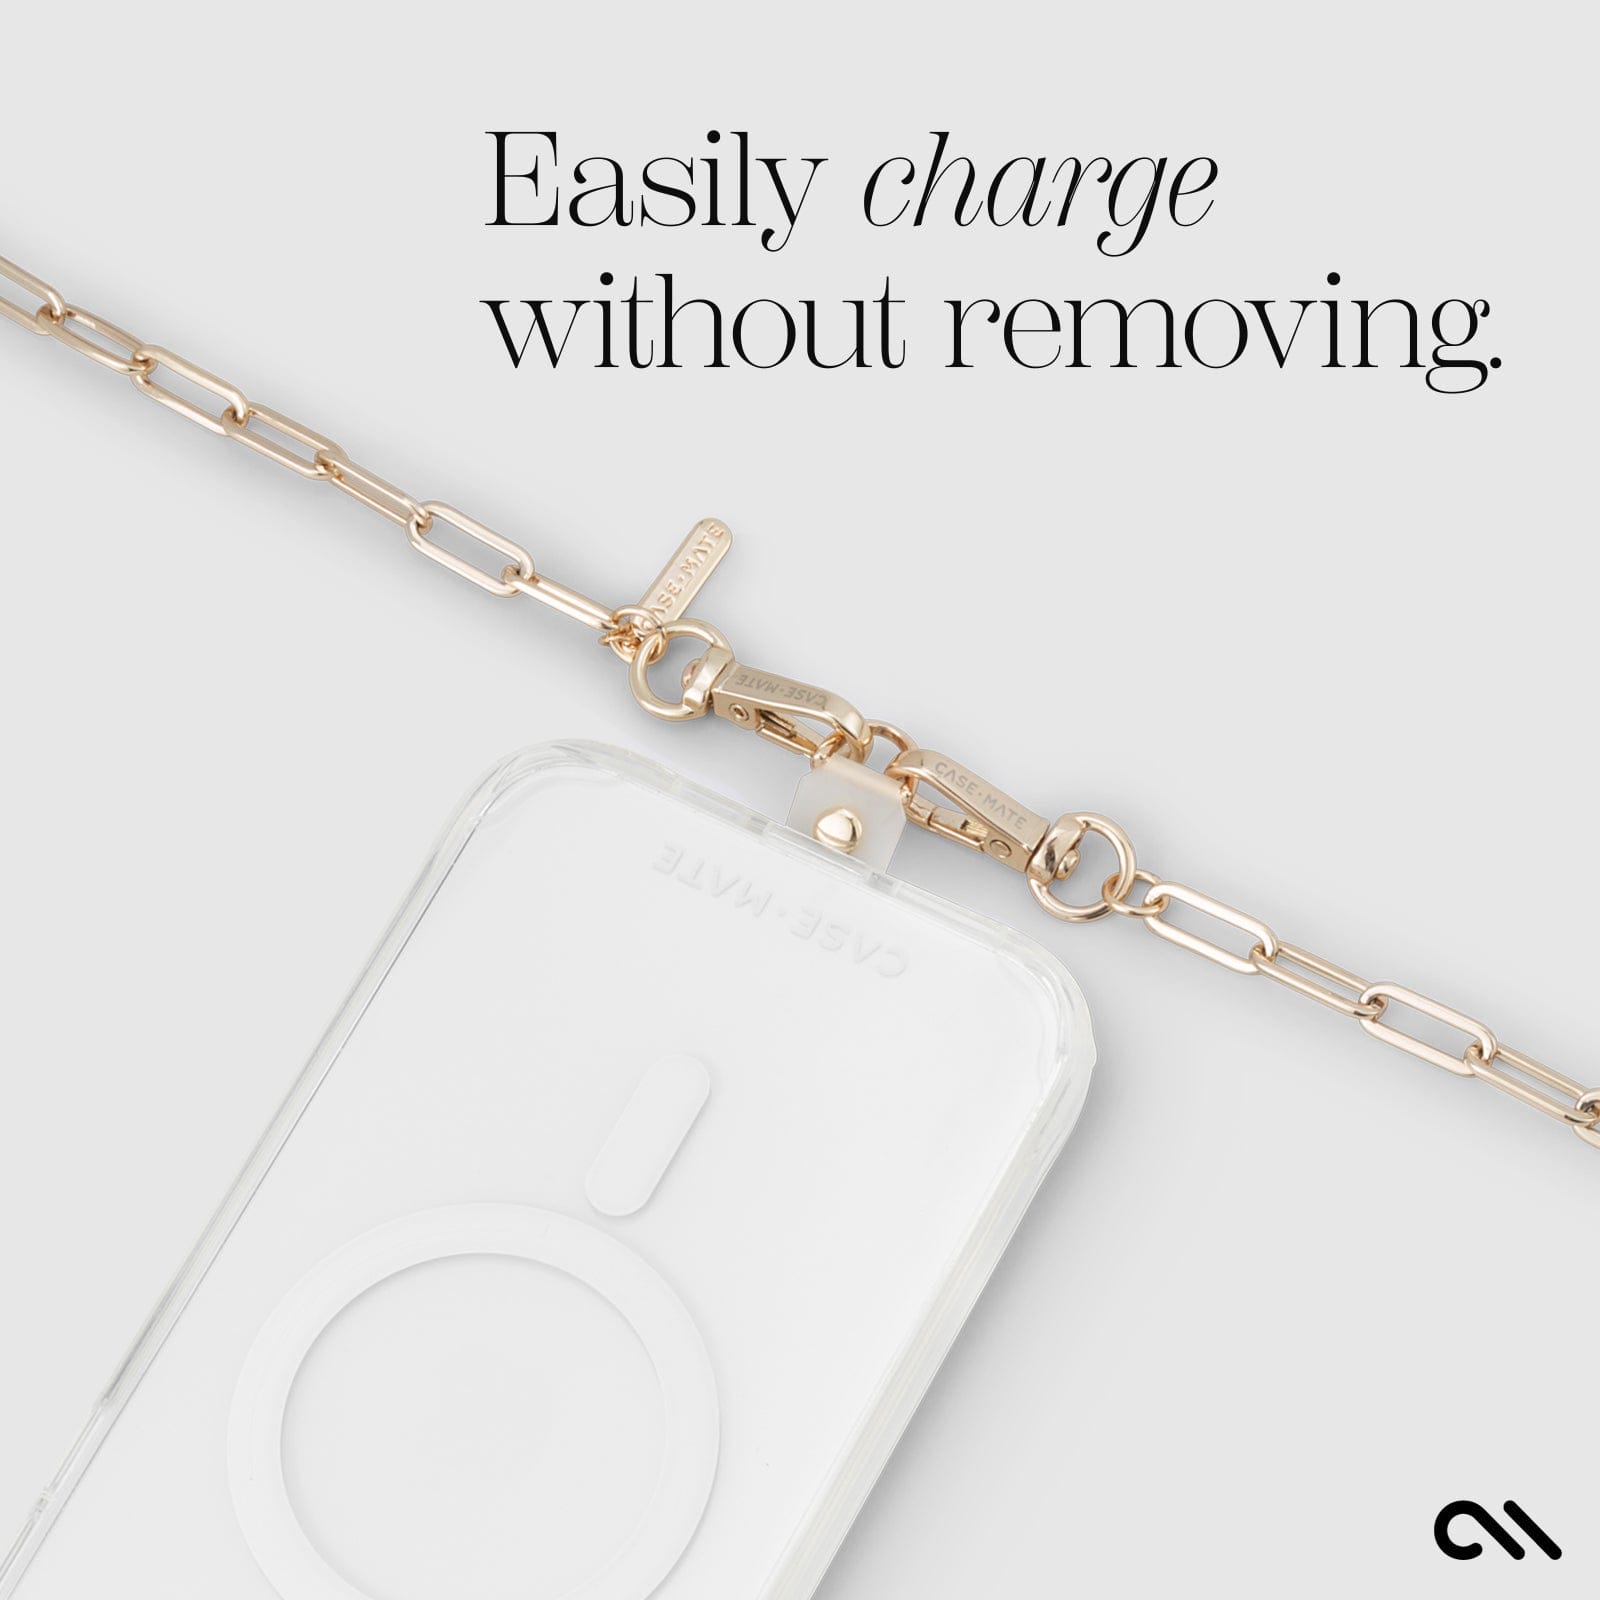 EASILY CHARGE WITHOUT REMOVING,